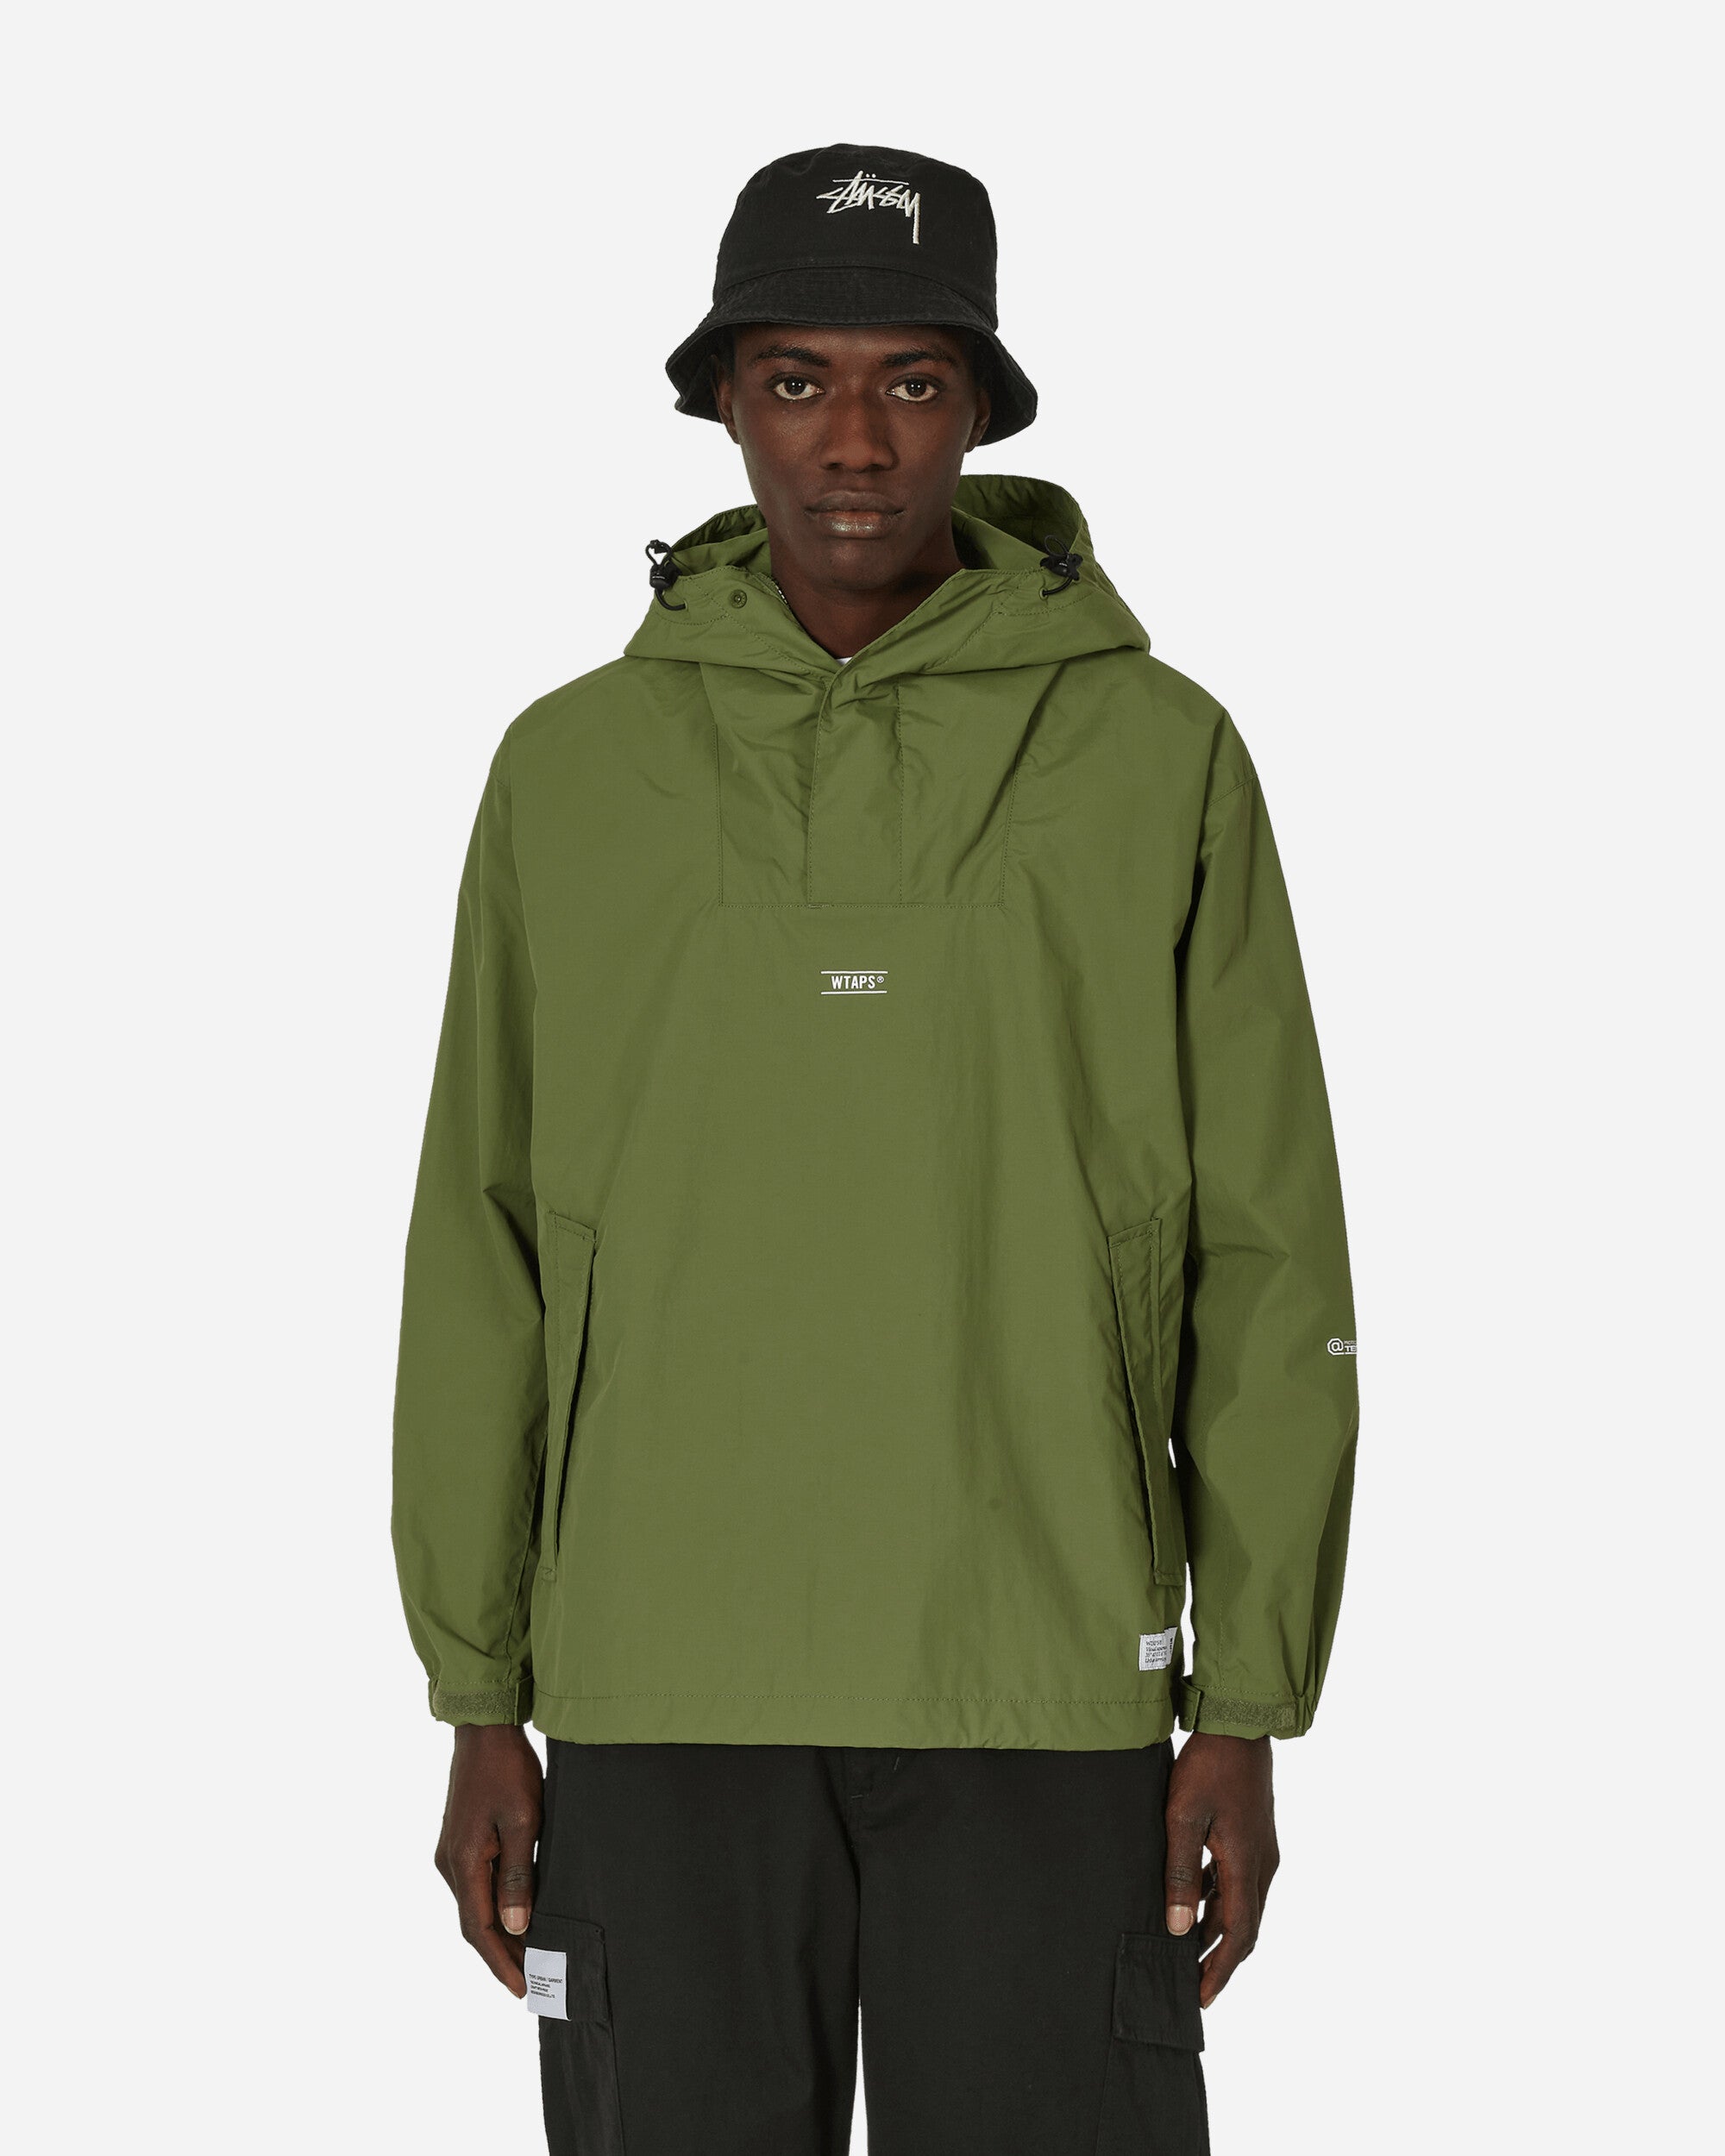 WTAPS SBS Jacket Olive Drab - Slam Jam® Official Store